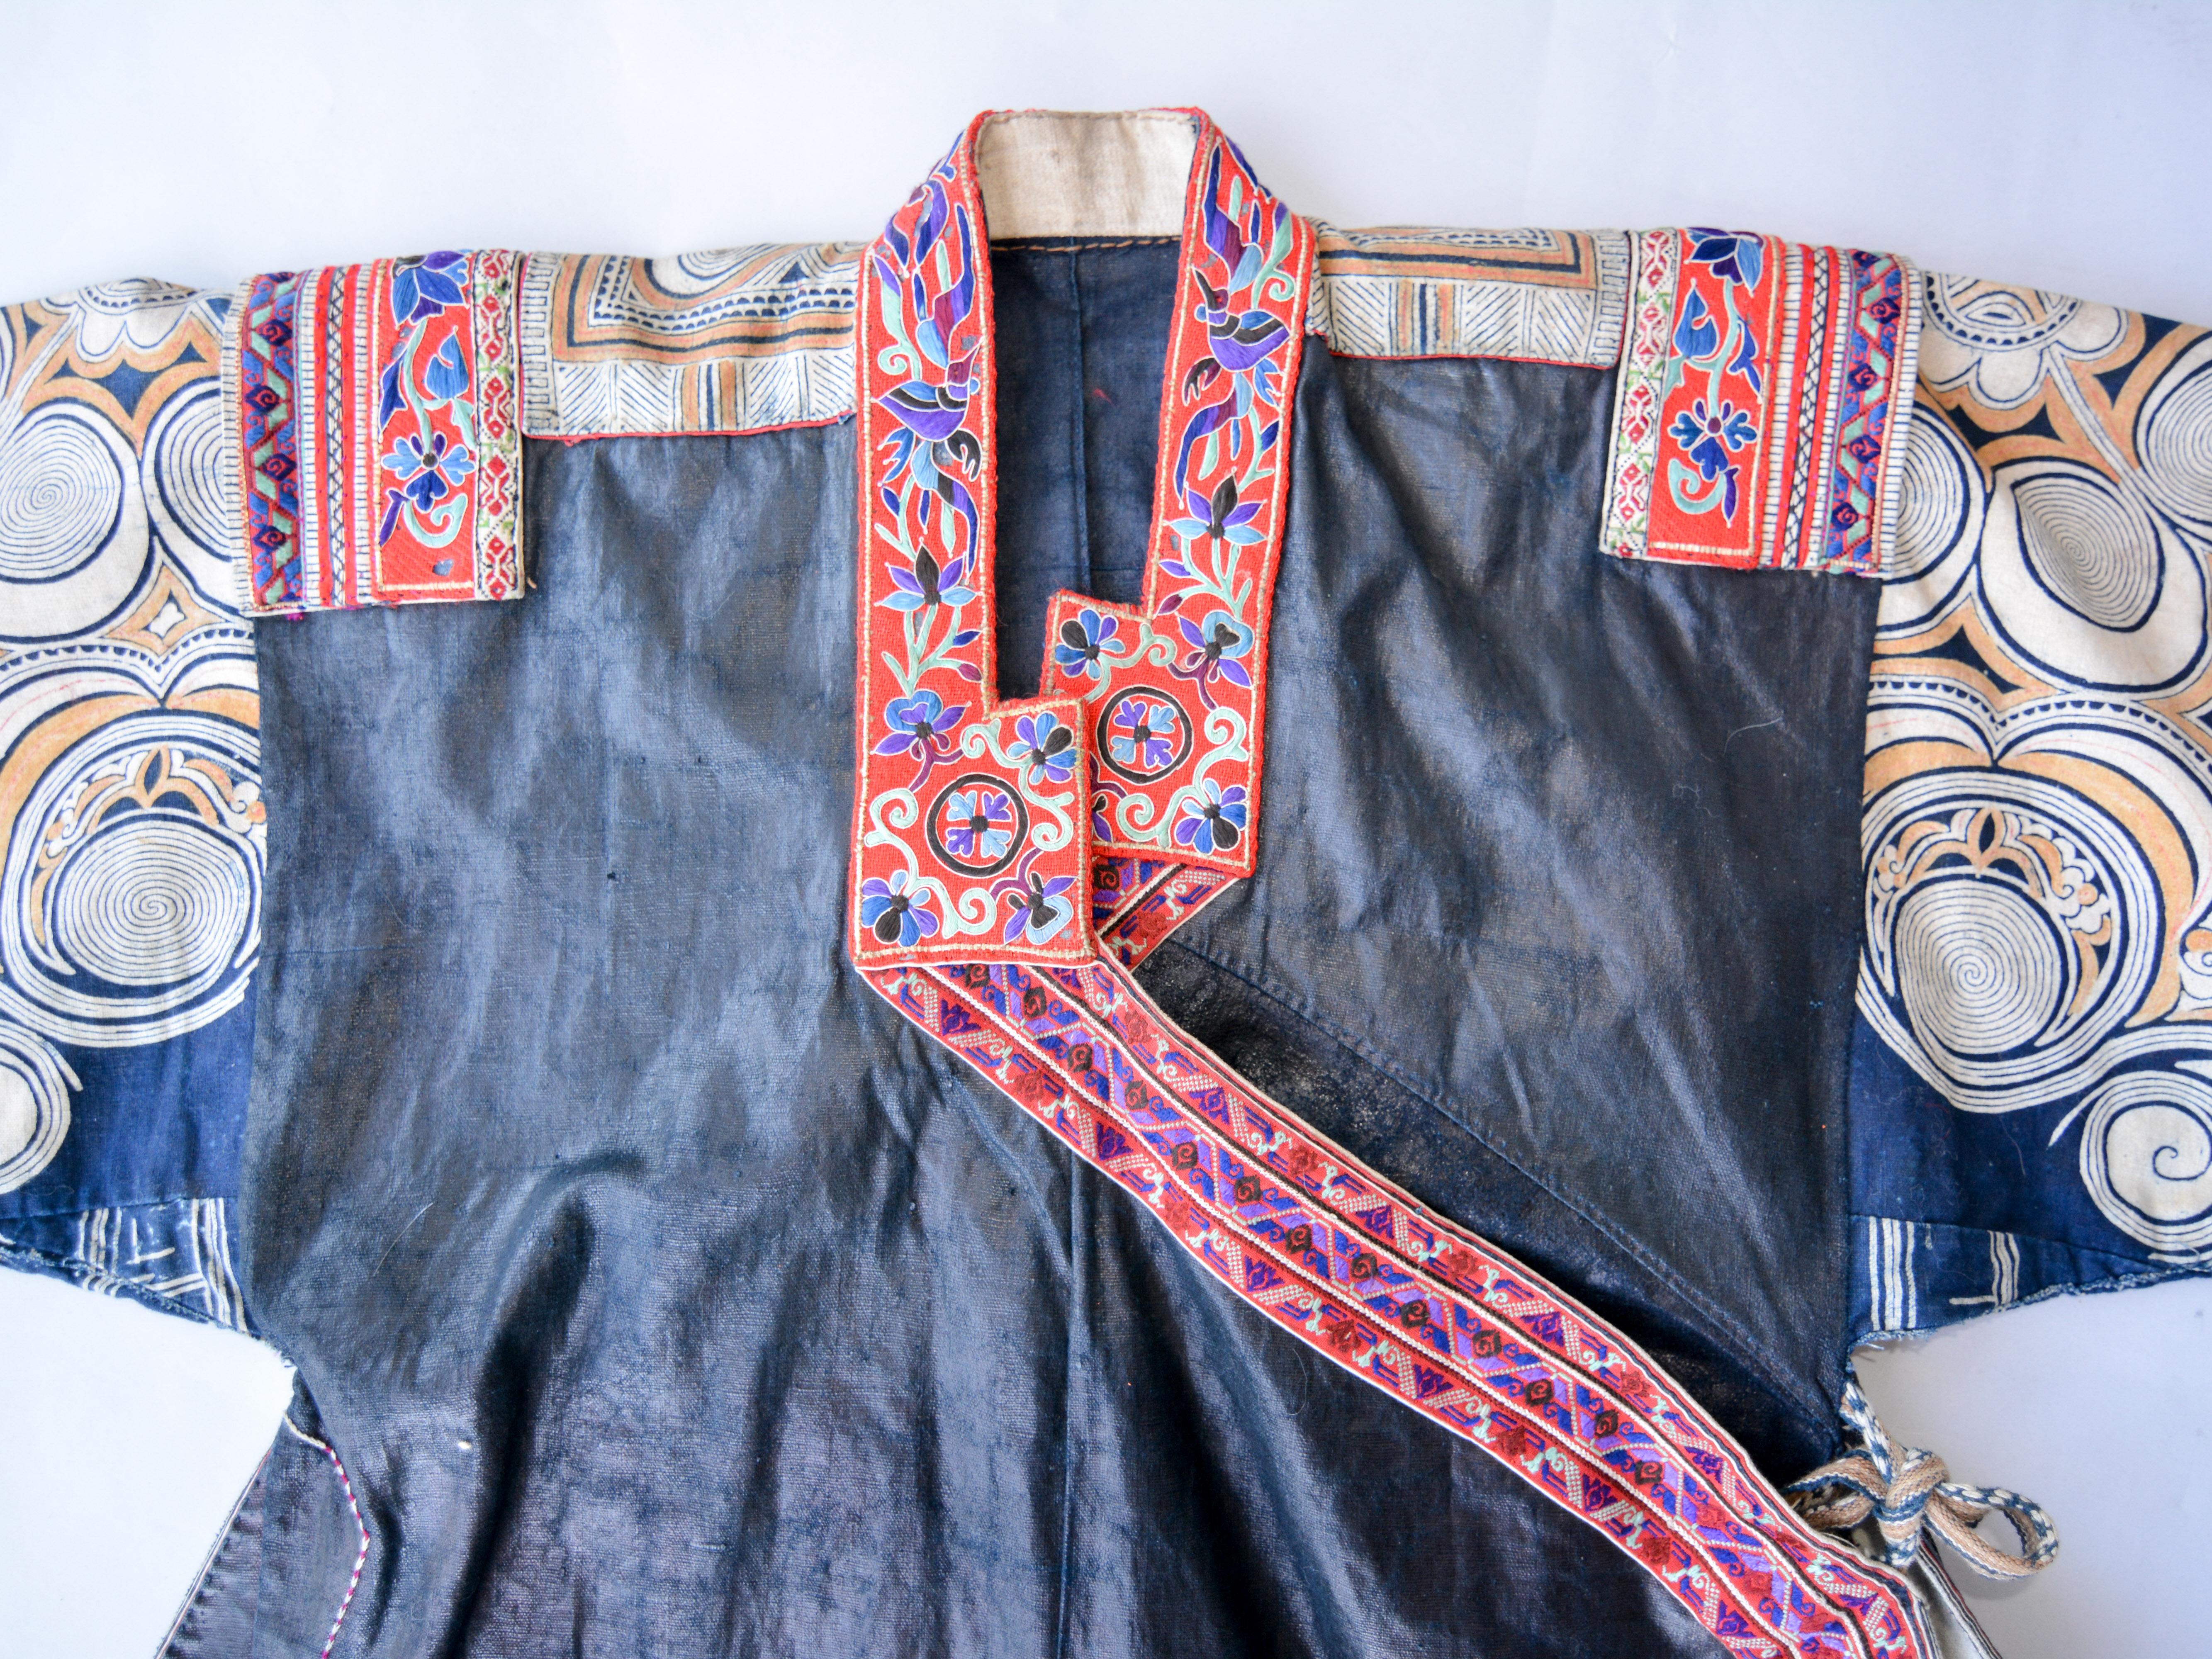 Vintage Women's Jacket. Miao of Da Yun county, south central Guizhou, China, mid-20th century.
Worn on festive occasions, this distinctive jacket is decorated with a batik wax-resist design on the upper sleeves and back in naturally dyed colors.